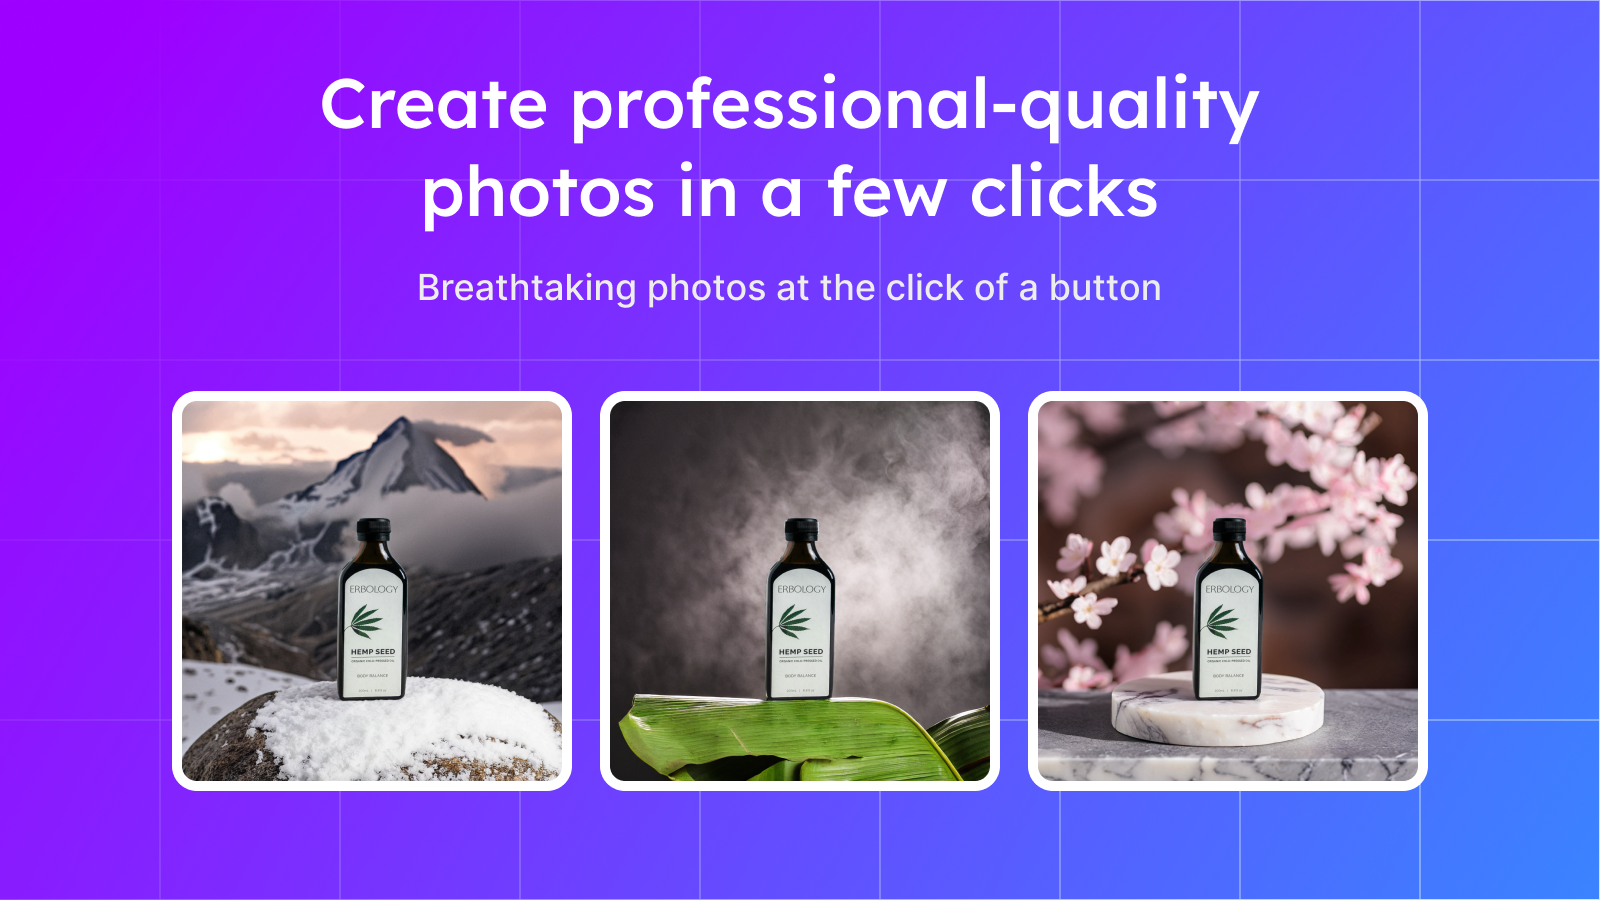 Instantly create professional-quality product photos